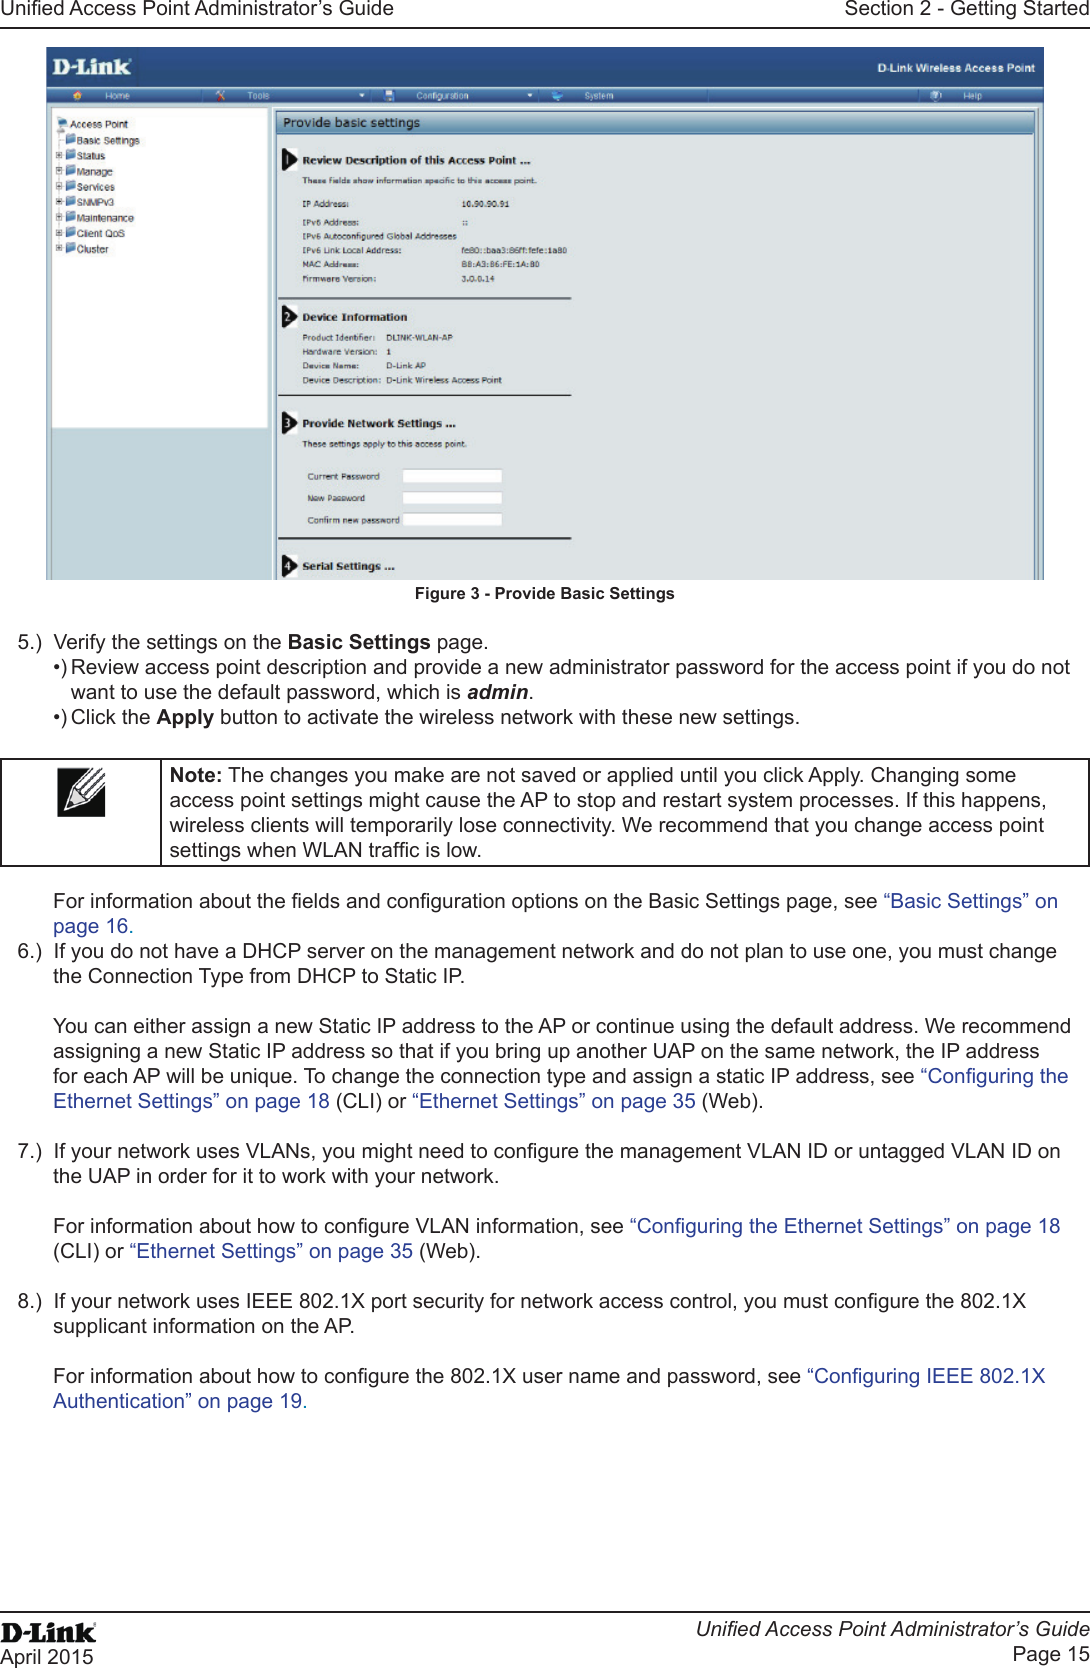 Unied Access Point Administrator’s GuideUnied Access Point Administrator’s GuidePage 15April 2015Section 2 - Getting StartedFigure 3 - Provide Basic Settings5.)  Verify the settings on the Basic Settings page.•) Review access point description and provide a new administrator password for the access point if you do not want to use the default password, which is admin.•) Click the Apply button to activate the wireless network with these new settings. Note: The changes you make are not saved or applied until you click Apply. Changing some access point settings might cause the AP to stop and restart system processes. If this happens, wireless clients will temporarily lose connectivity. We recommend that you change access point settings when WLAN trafc is low. For information about the elds and conguration options on the Basic Settings page, see “Basic Settings” on page 16.6.)  If you do not have a DHCP server on the management network and do not plan to use one, you must change the Connection Type from DHCP to Static IP. You can either assign a new Static IP address to the AP or continue using the default address. We recommend assigning a new Static IP address so that if you bring up another UAP on the same network, the IP address for each AP will be unique. To change the connection type and assign a static IP address, see “Conguring the Ethernet Settings” on page 18 (CLI) or “Ethernet Settings” on page 35 (Web).7.)  If your network uses VLANs, you might need to congure the management VLAN ID or untagged VLAN ID on the UAP in order for it to work with your network. For information about how to congure VLAN information, see “Conguring the Ethernet Settings” on page 18 (CLI) or “Ethernet Settings” on page 35 (Web).8.)  If your network uses IEEE 802.1X port security for network access control, you must congure the 802.1X supplicant information on the AP.For information about how to congure the 802.1X user name and password, see “Conguring IEEE 802.1X Authentication” on page 19.